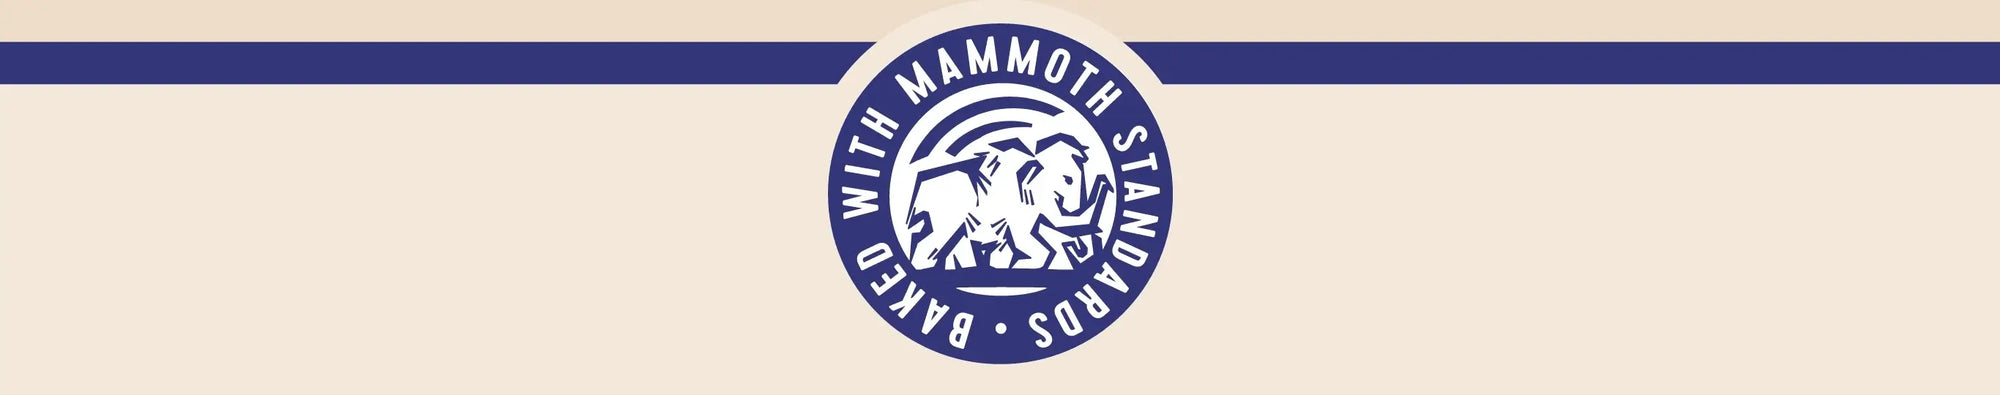 Base Culture Products are Baked With Mammoth Standards